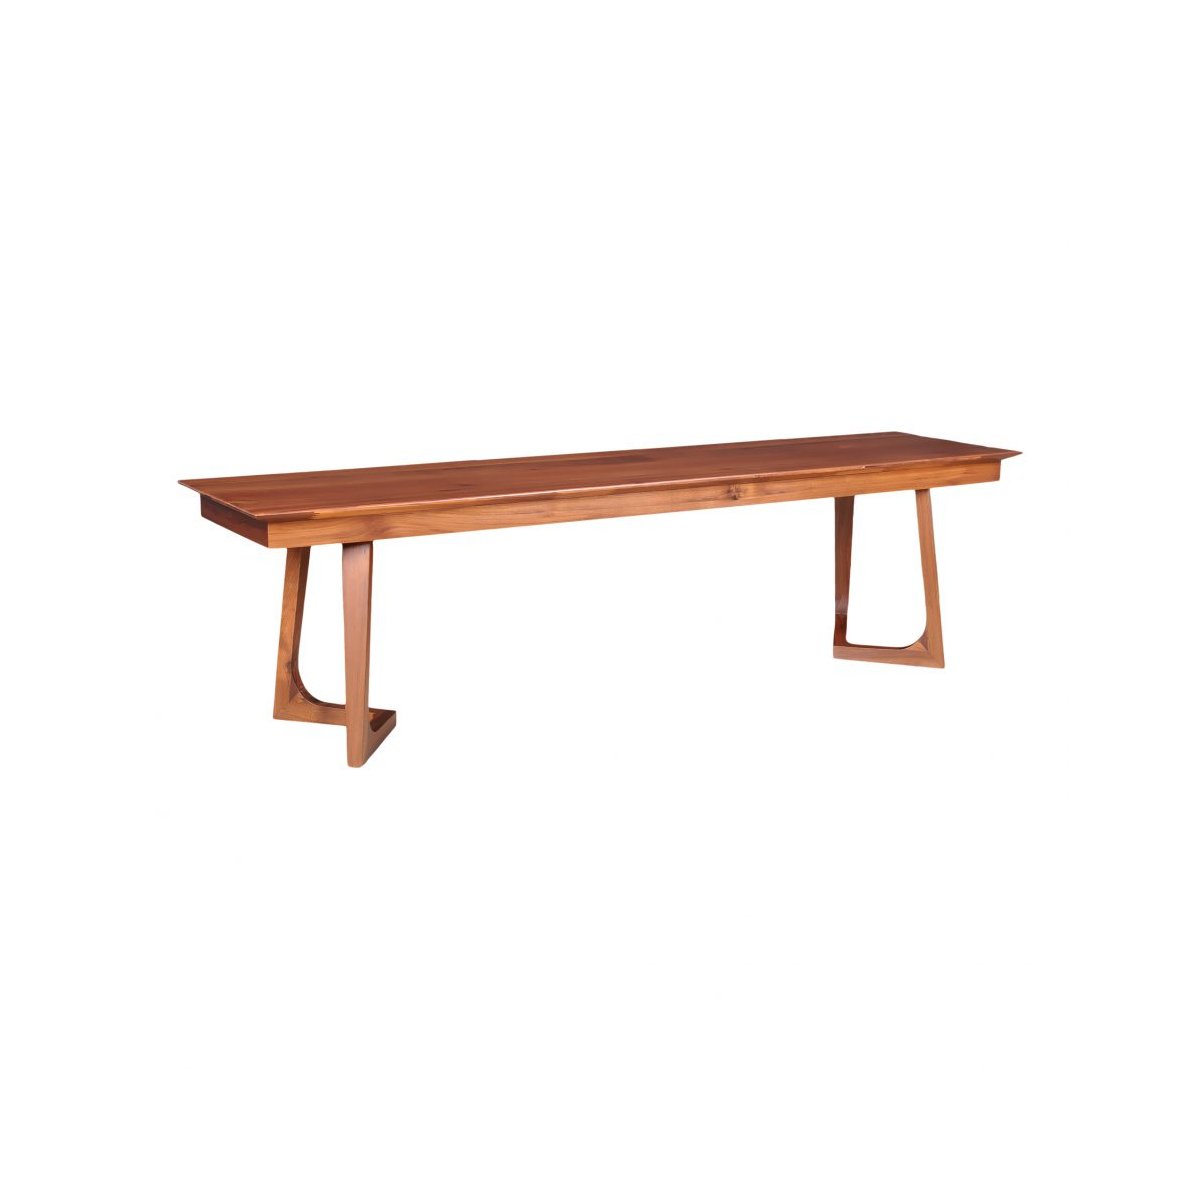 Godenza Bench Walnut Dining Benches Moe's     Four Hands, Burke Decor, Mid Century Modern Furniture, Old Bones Furniture Company, Old Bones Co, Modern Mid Century, Designer Furniture, https://www.oldbonesco.com/